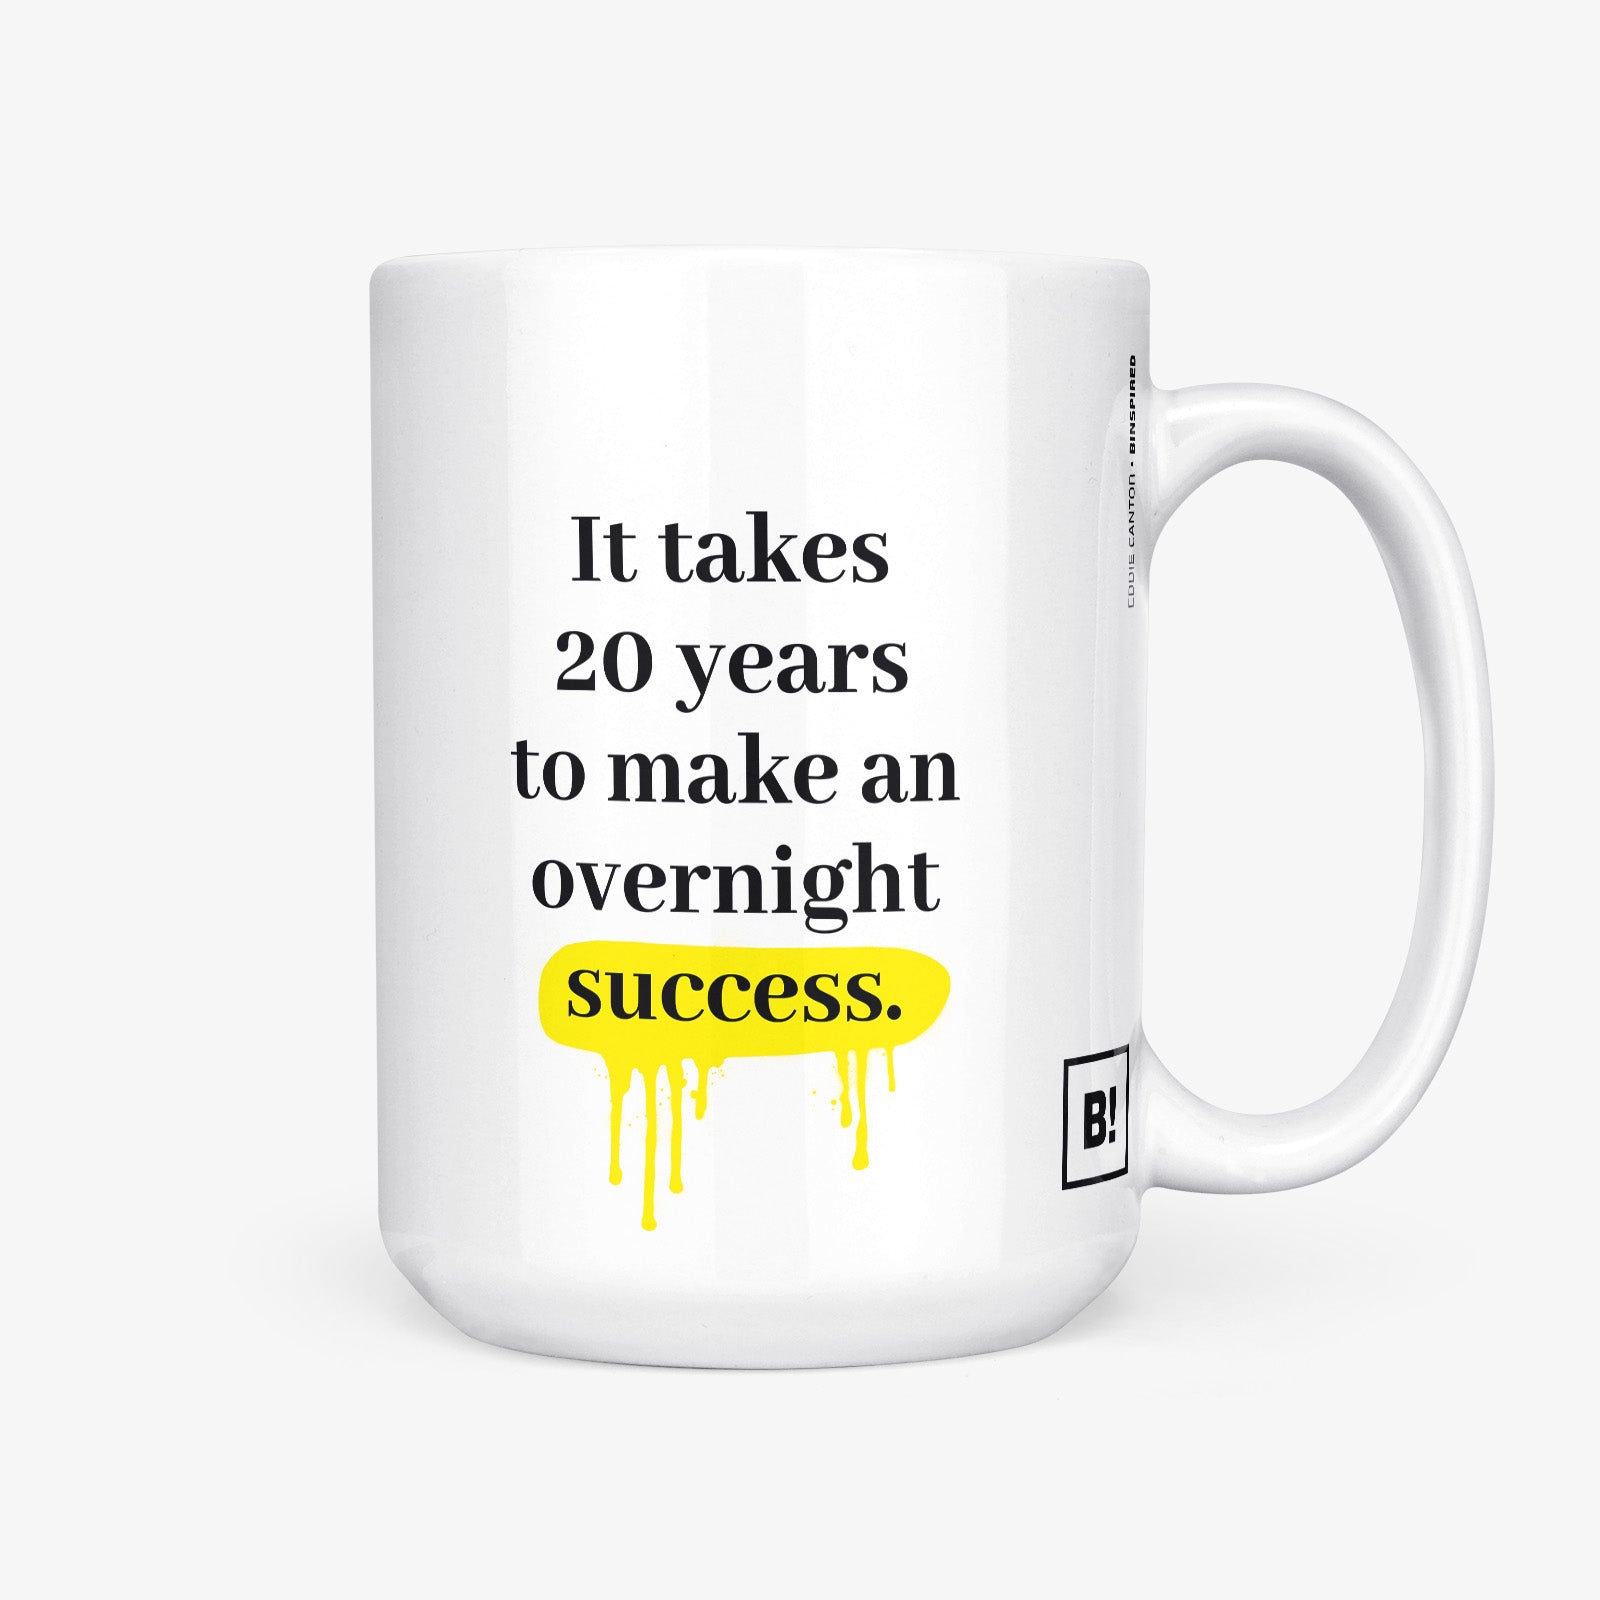 Be inspired by Eddie Cantor's famous quote, "It takes 20 years to make an overnight success" on this white and glossy 15oz coffee mug with the handle on the right.